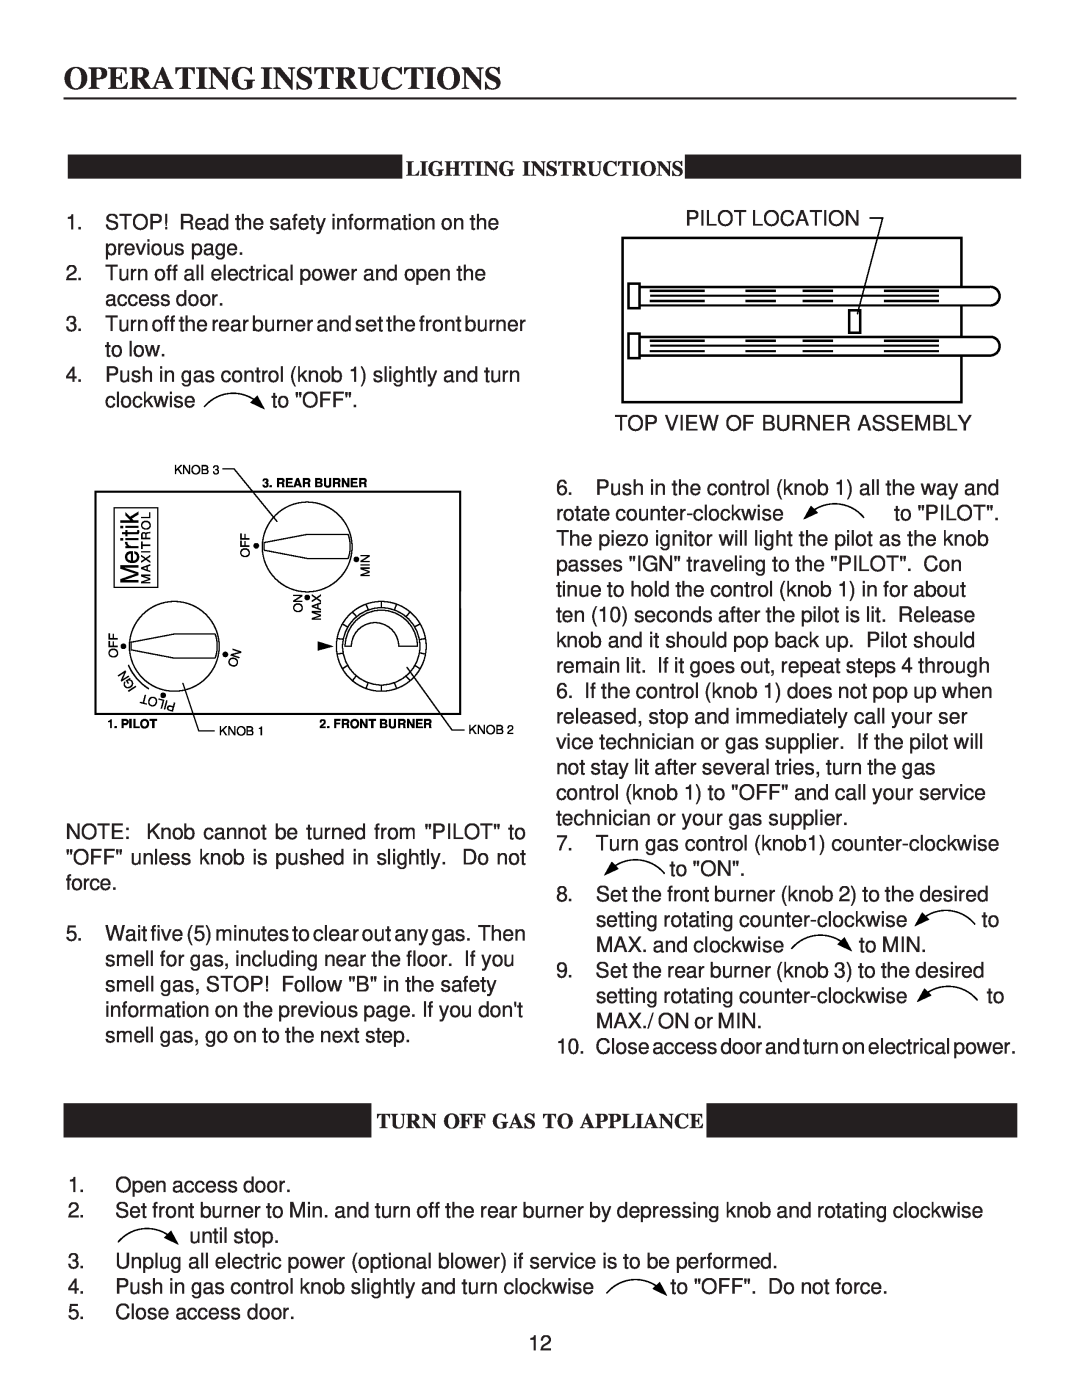 United States Stove A9843N, G9843L, C9843N, A9843L Operating Instructions, Lighting Instructions, Turn Off Gas To Appliance 